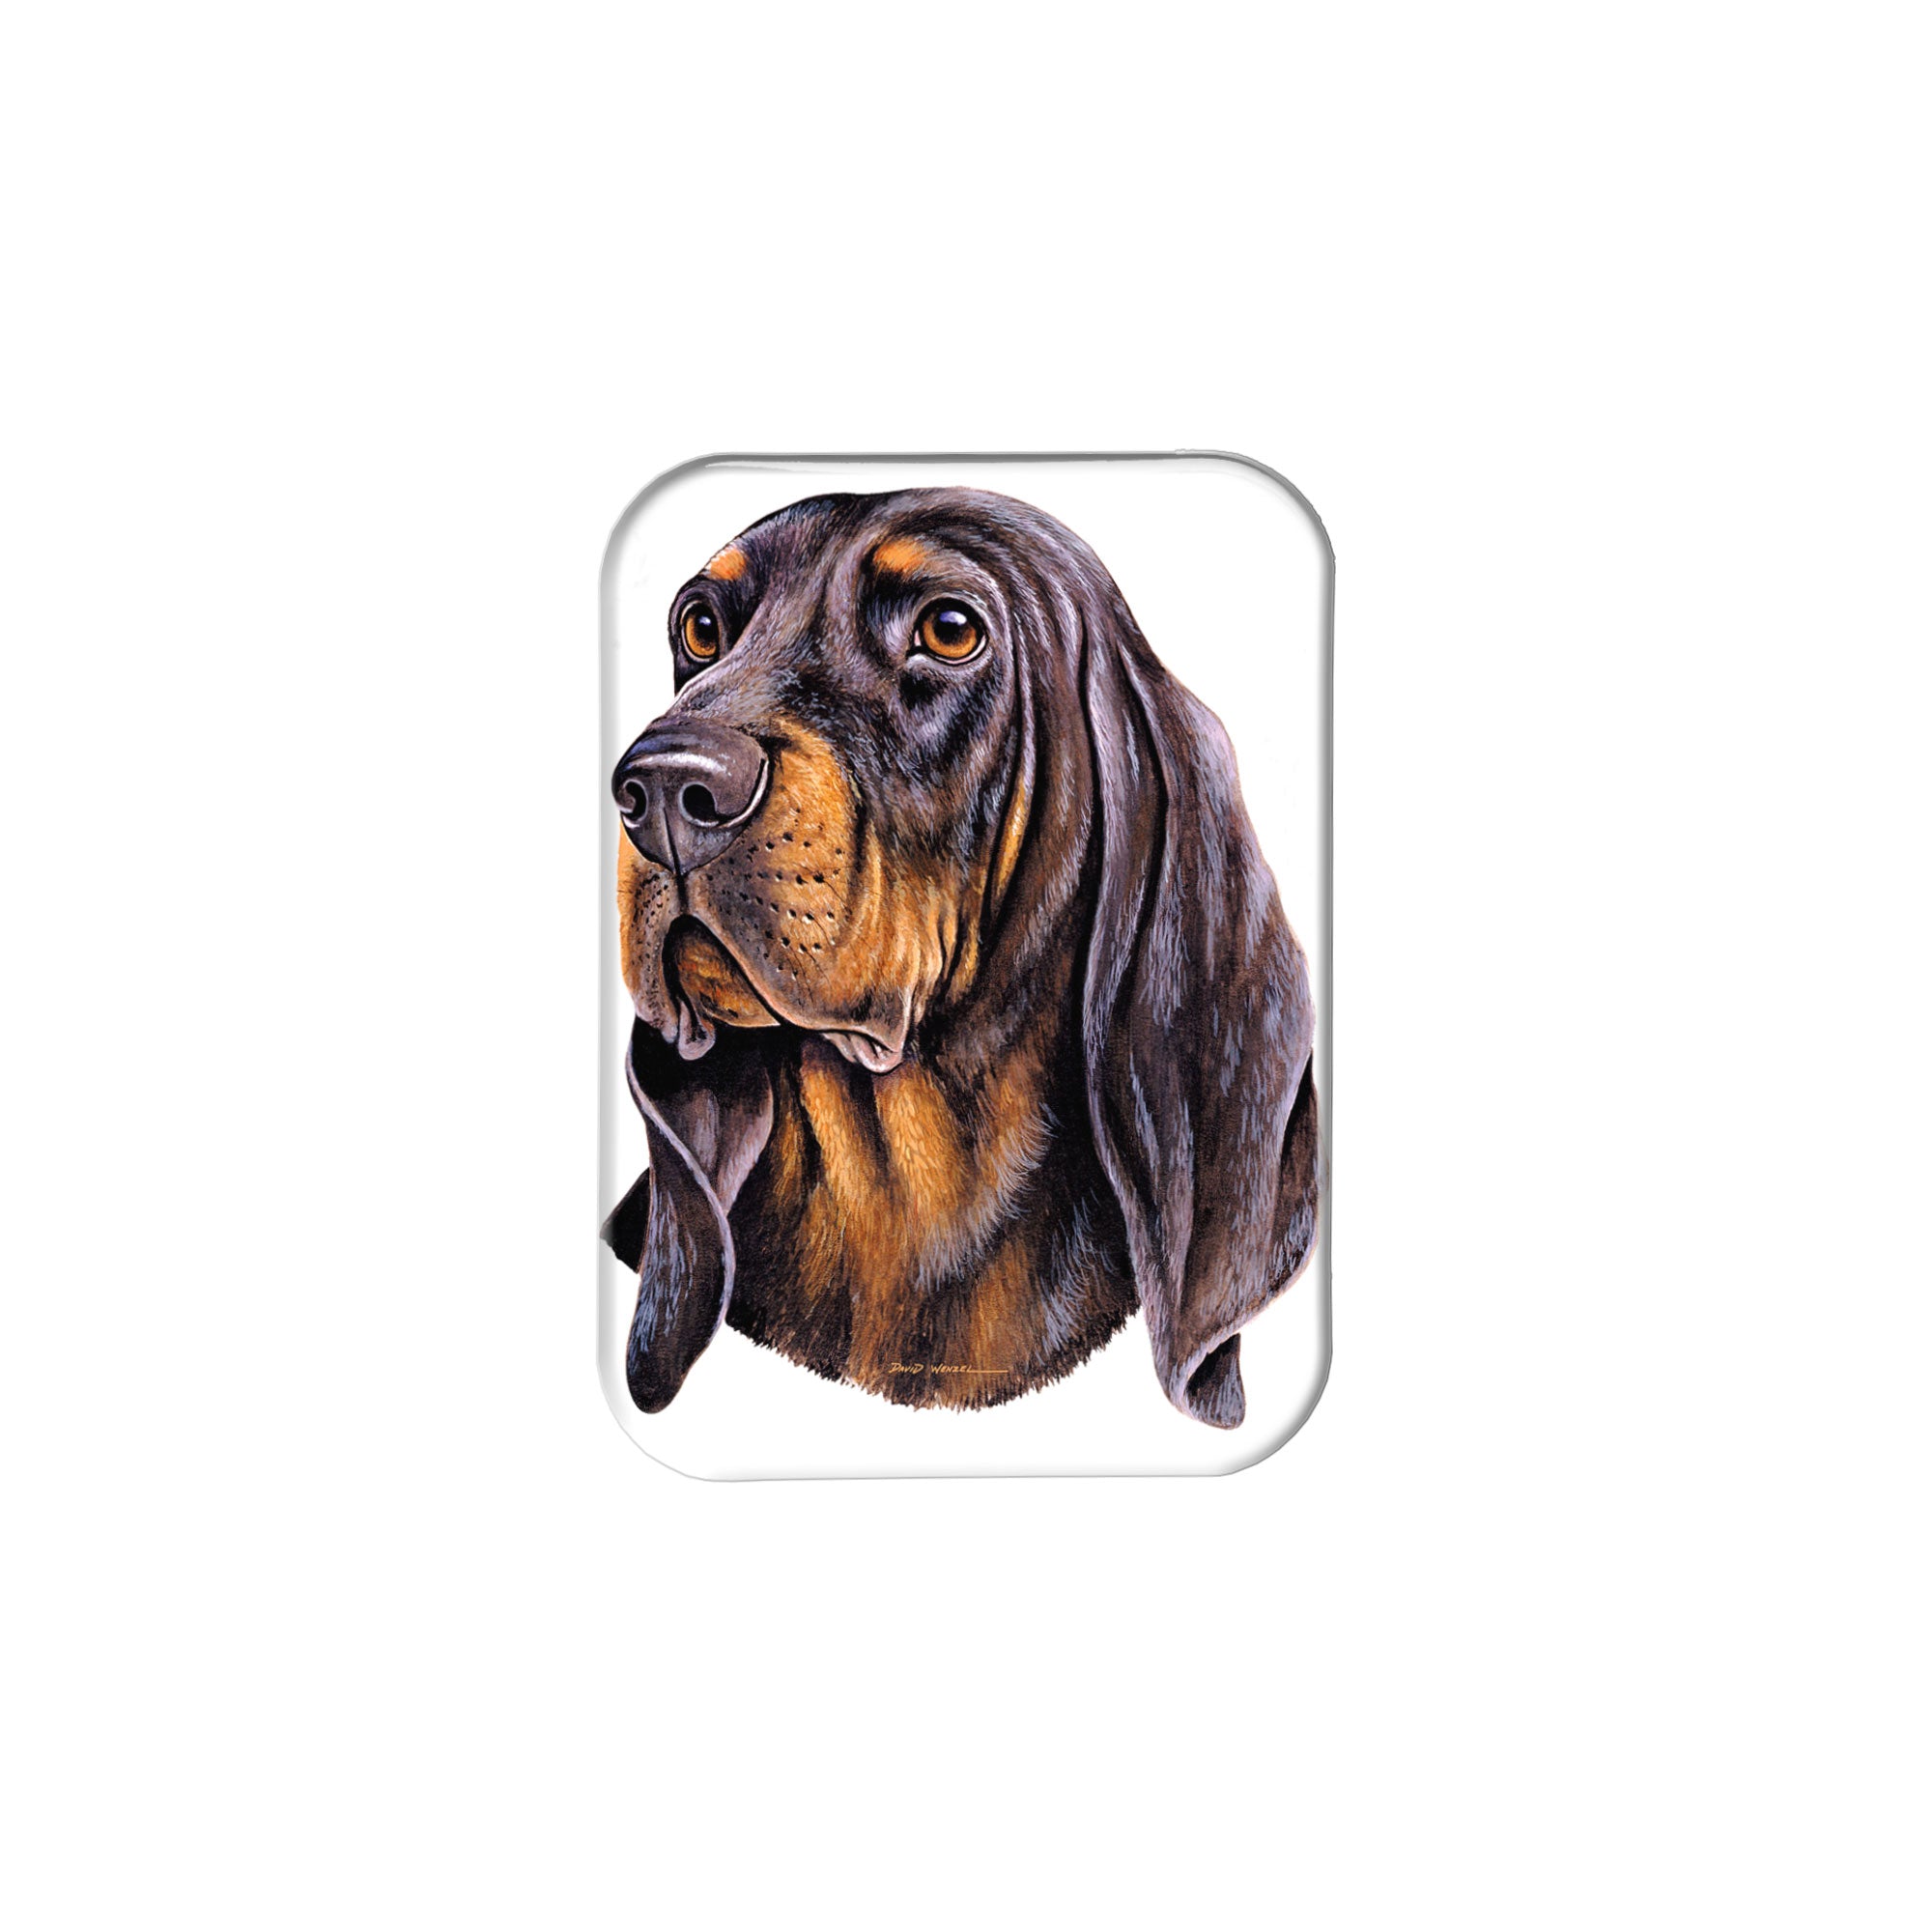 "Black and Tan Coonhound" - 2.5" X 3.5" Rectangle Fridge Magnets